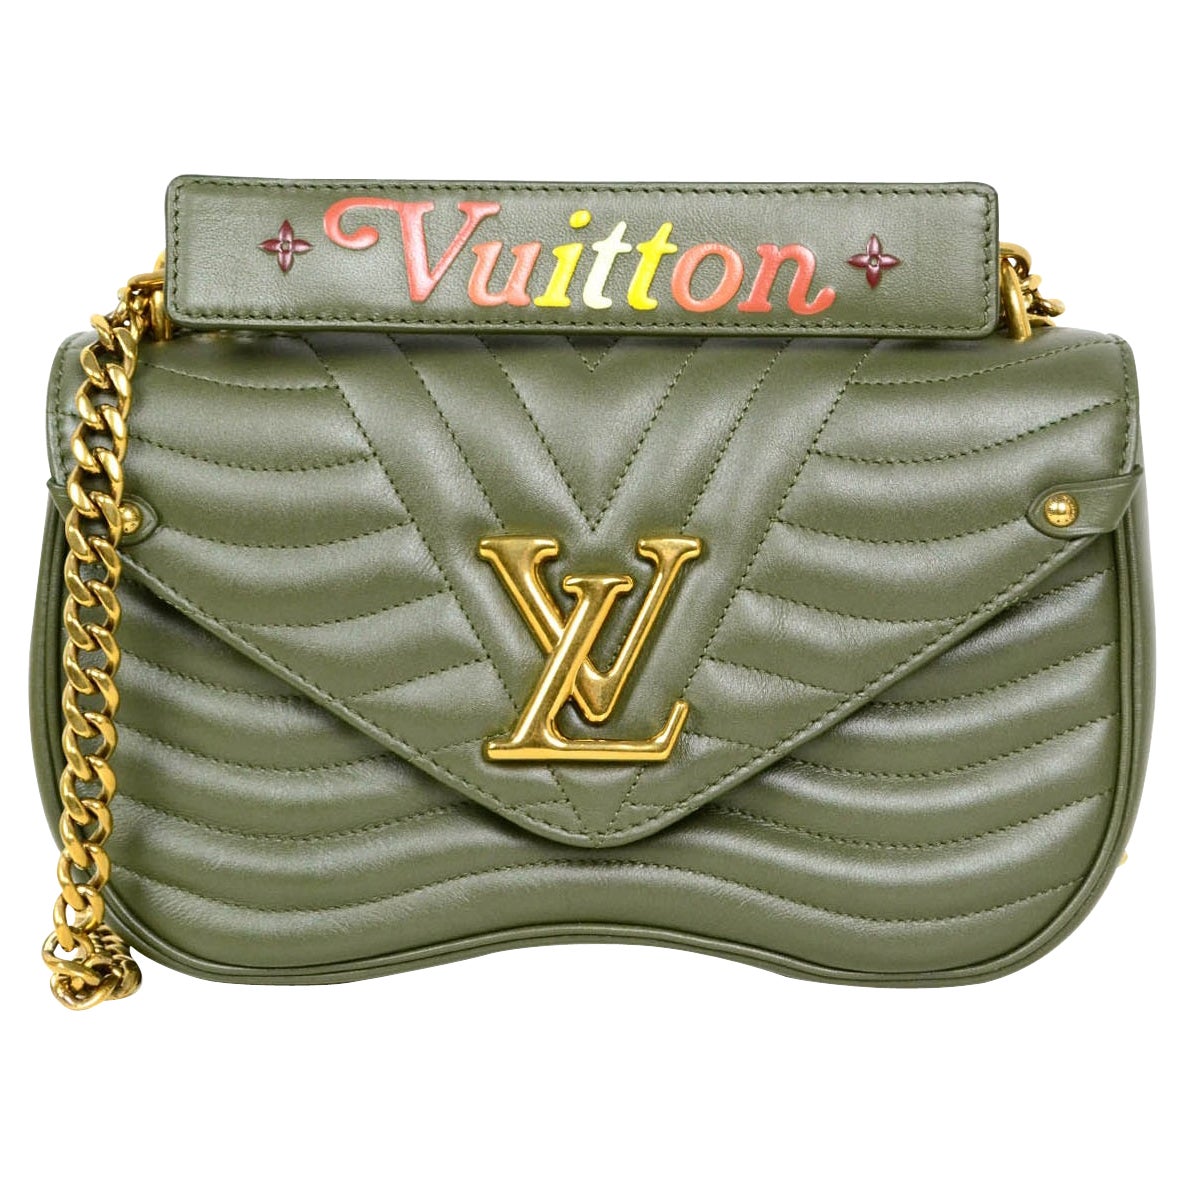 Louis Vuitton NEW 2020 Khaki Green New Wave MM Chain Bag For Sale